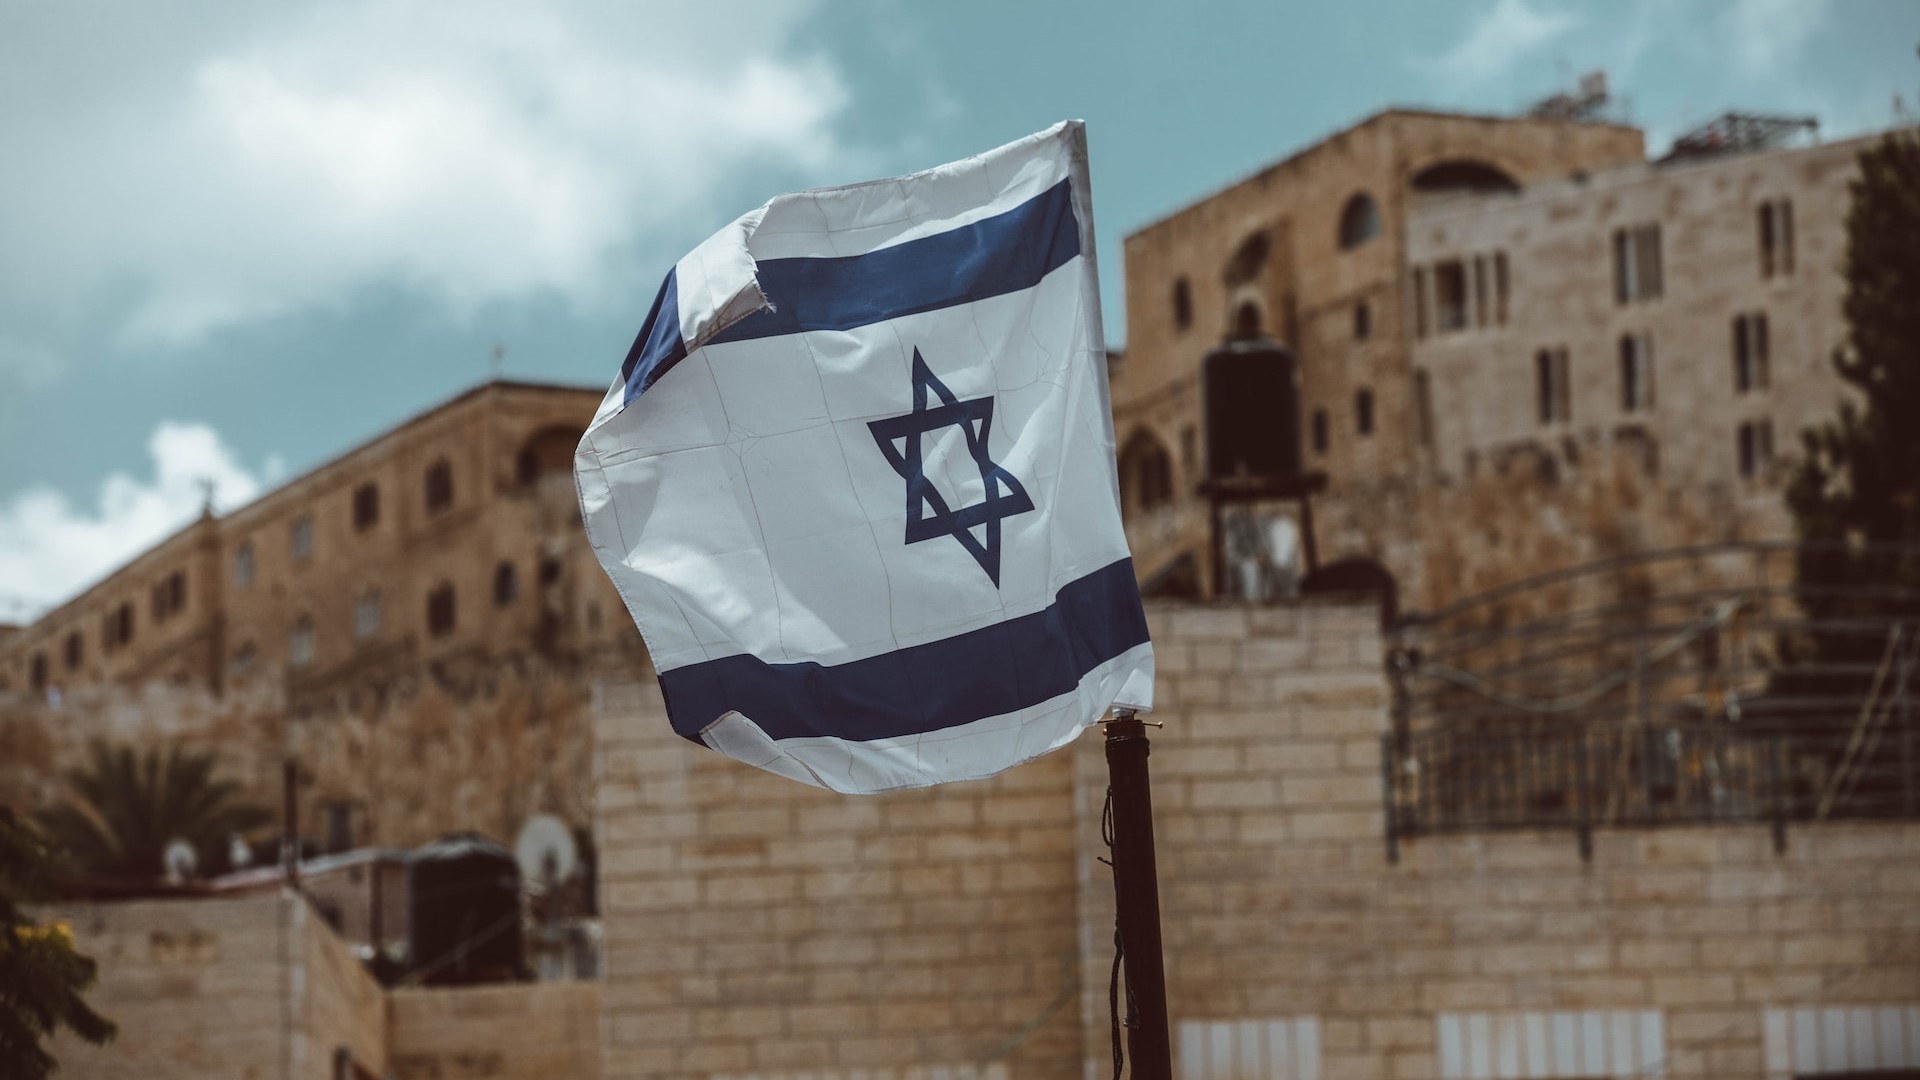 Zionism: A Call to Awe and Compassion